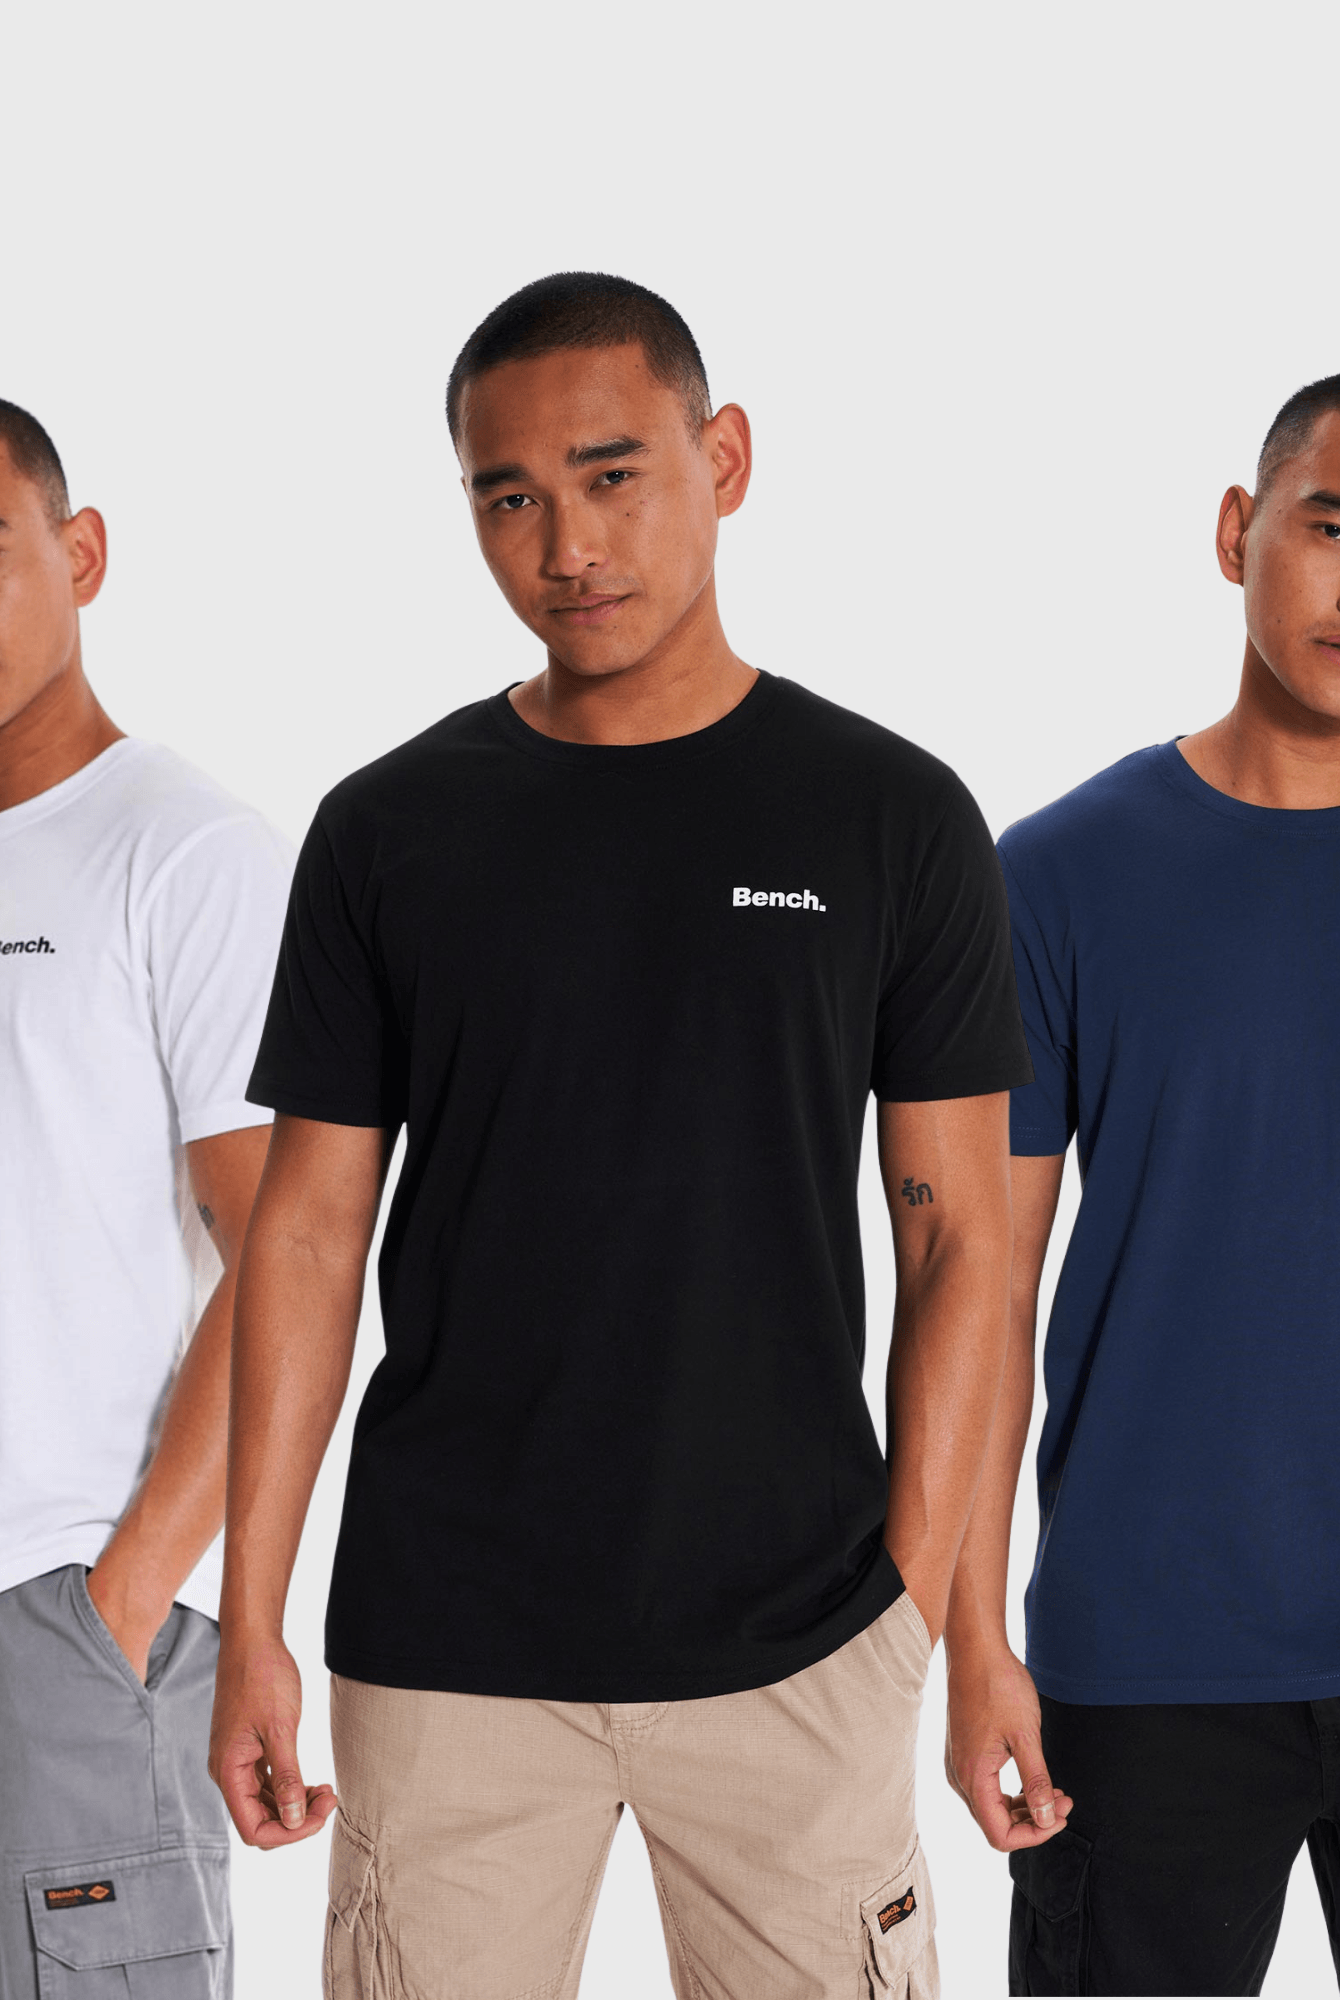 Mens 'DANNY' 3 Pack T-Shirts - ASSORTED - Shop at www.Bench.co.uk #LoveMyHood